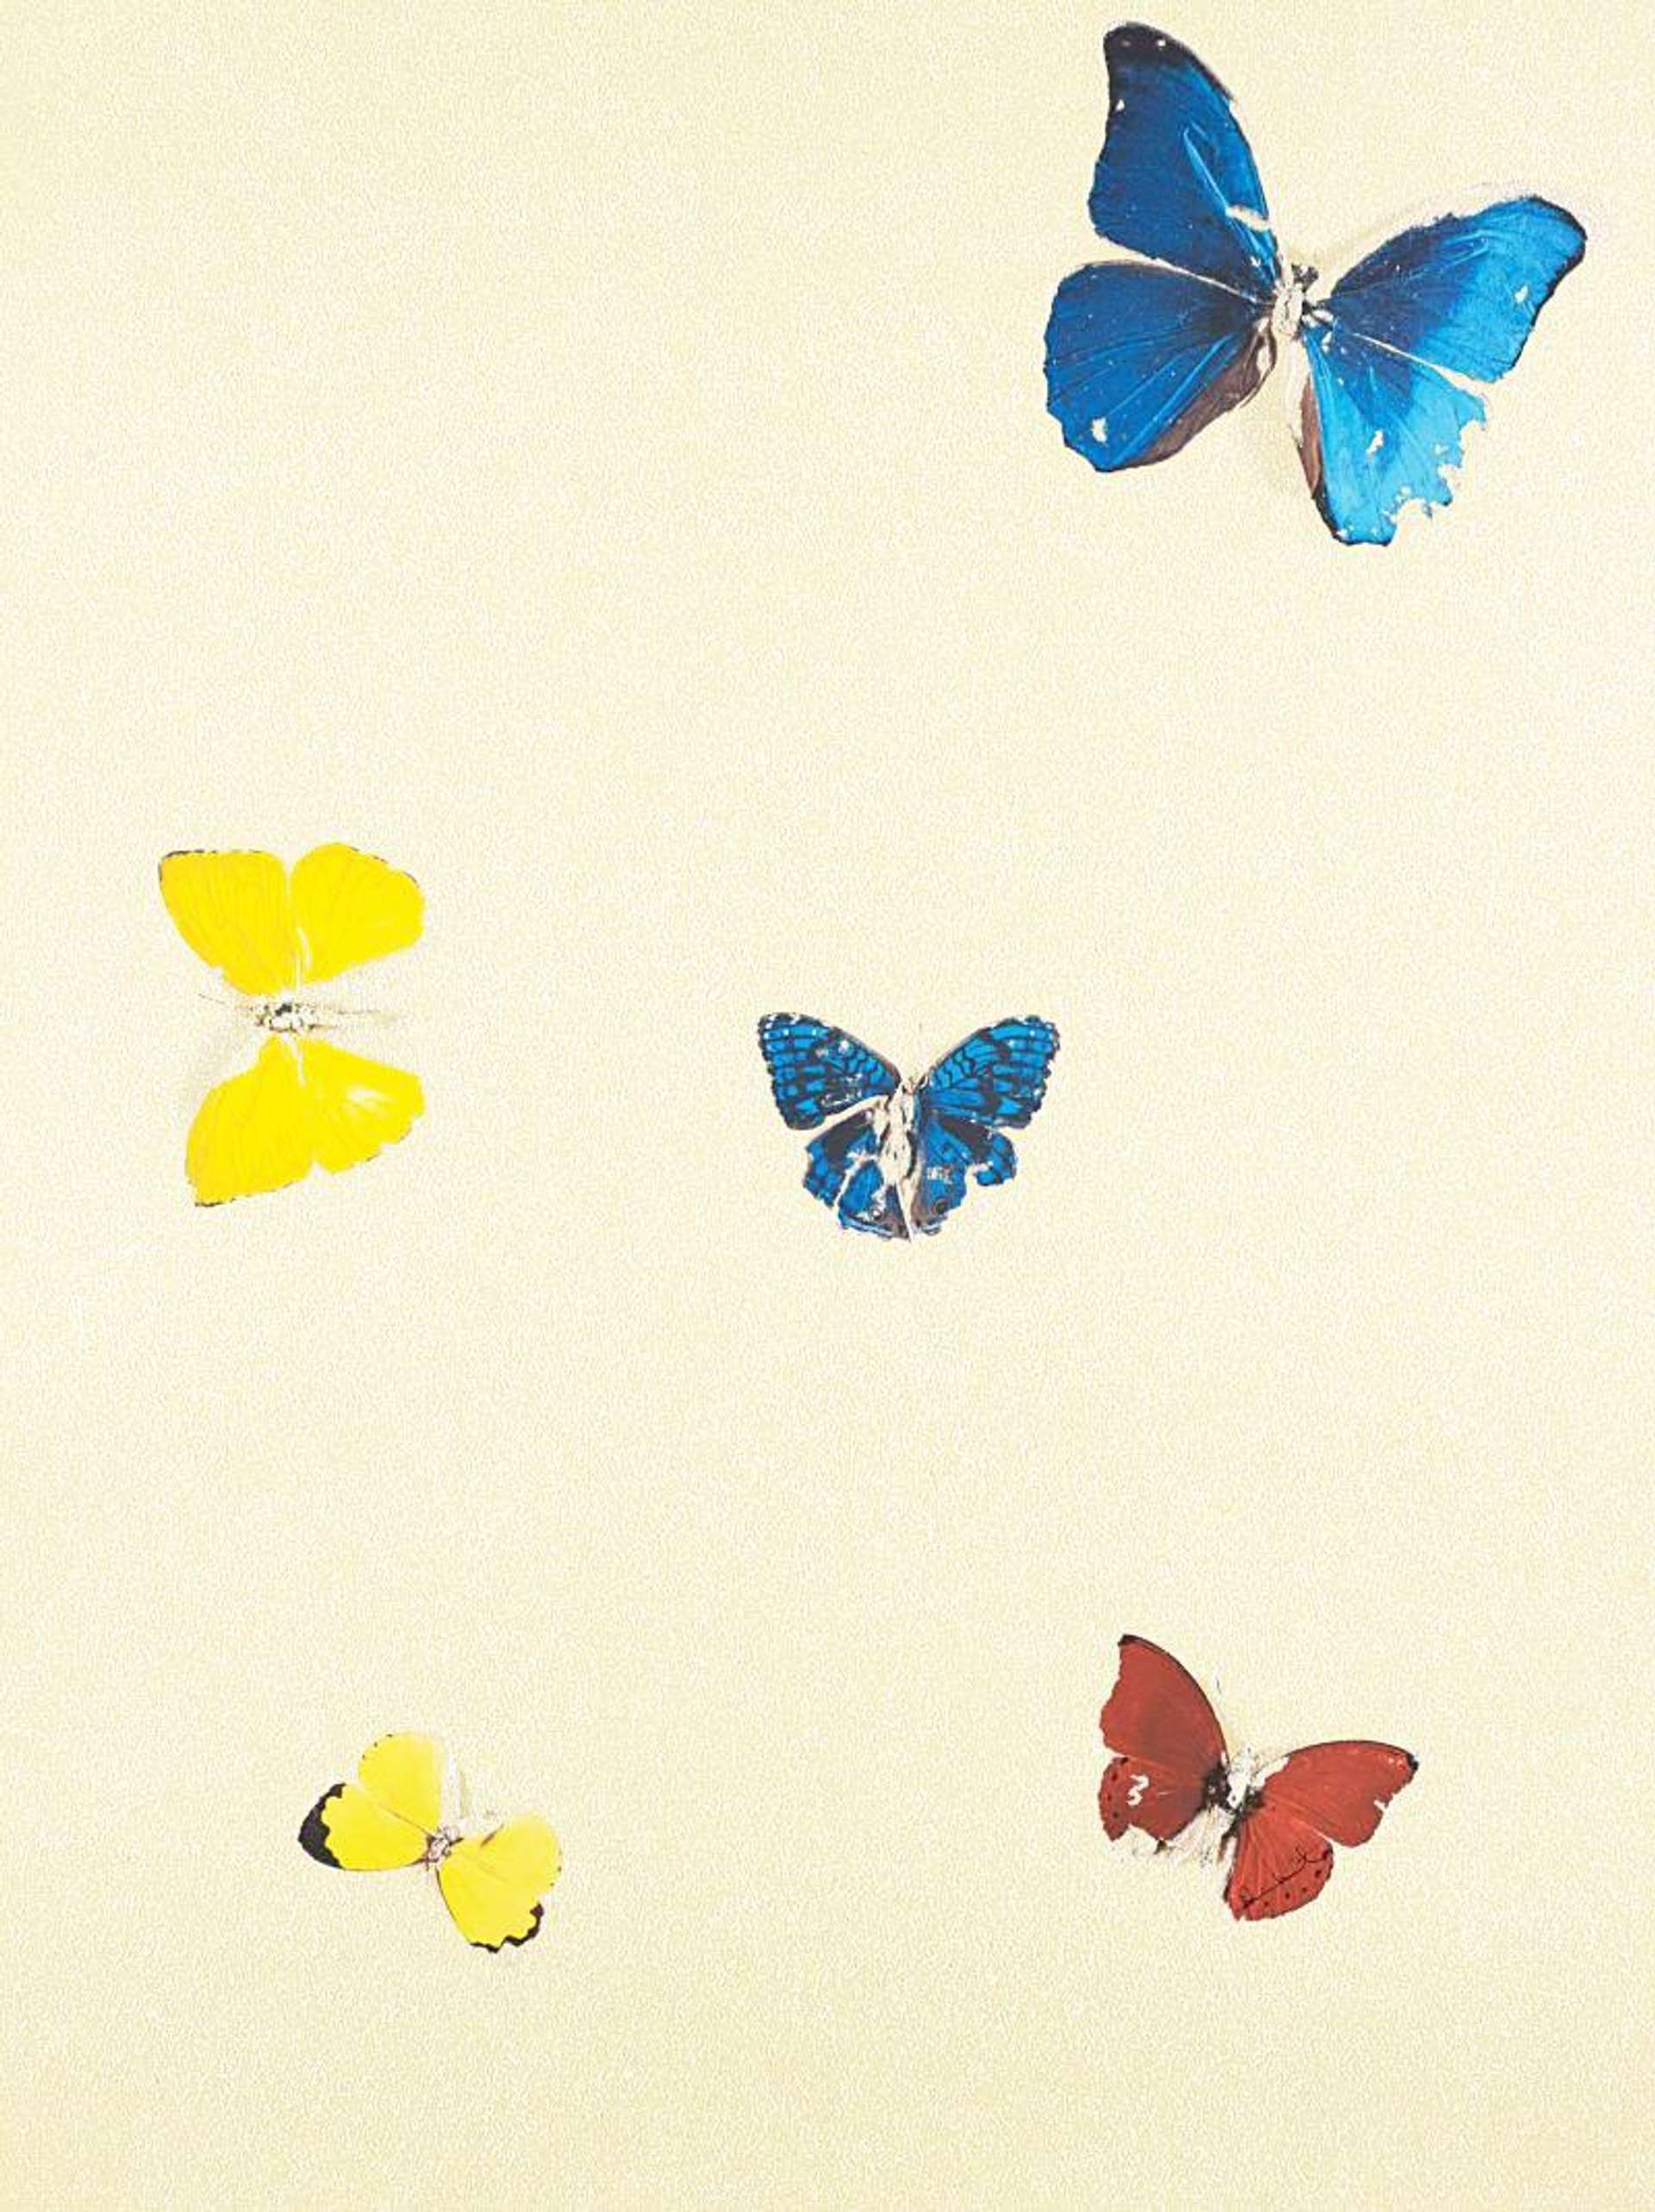 Damien Hirst: All You Need Is Love - Signed Print